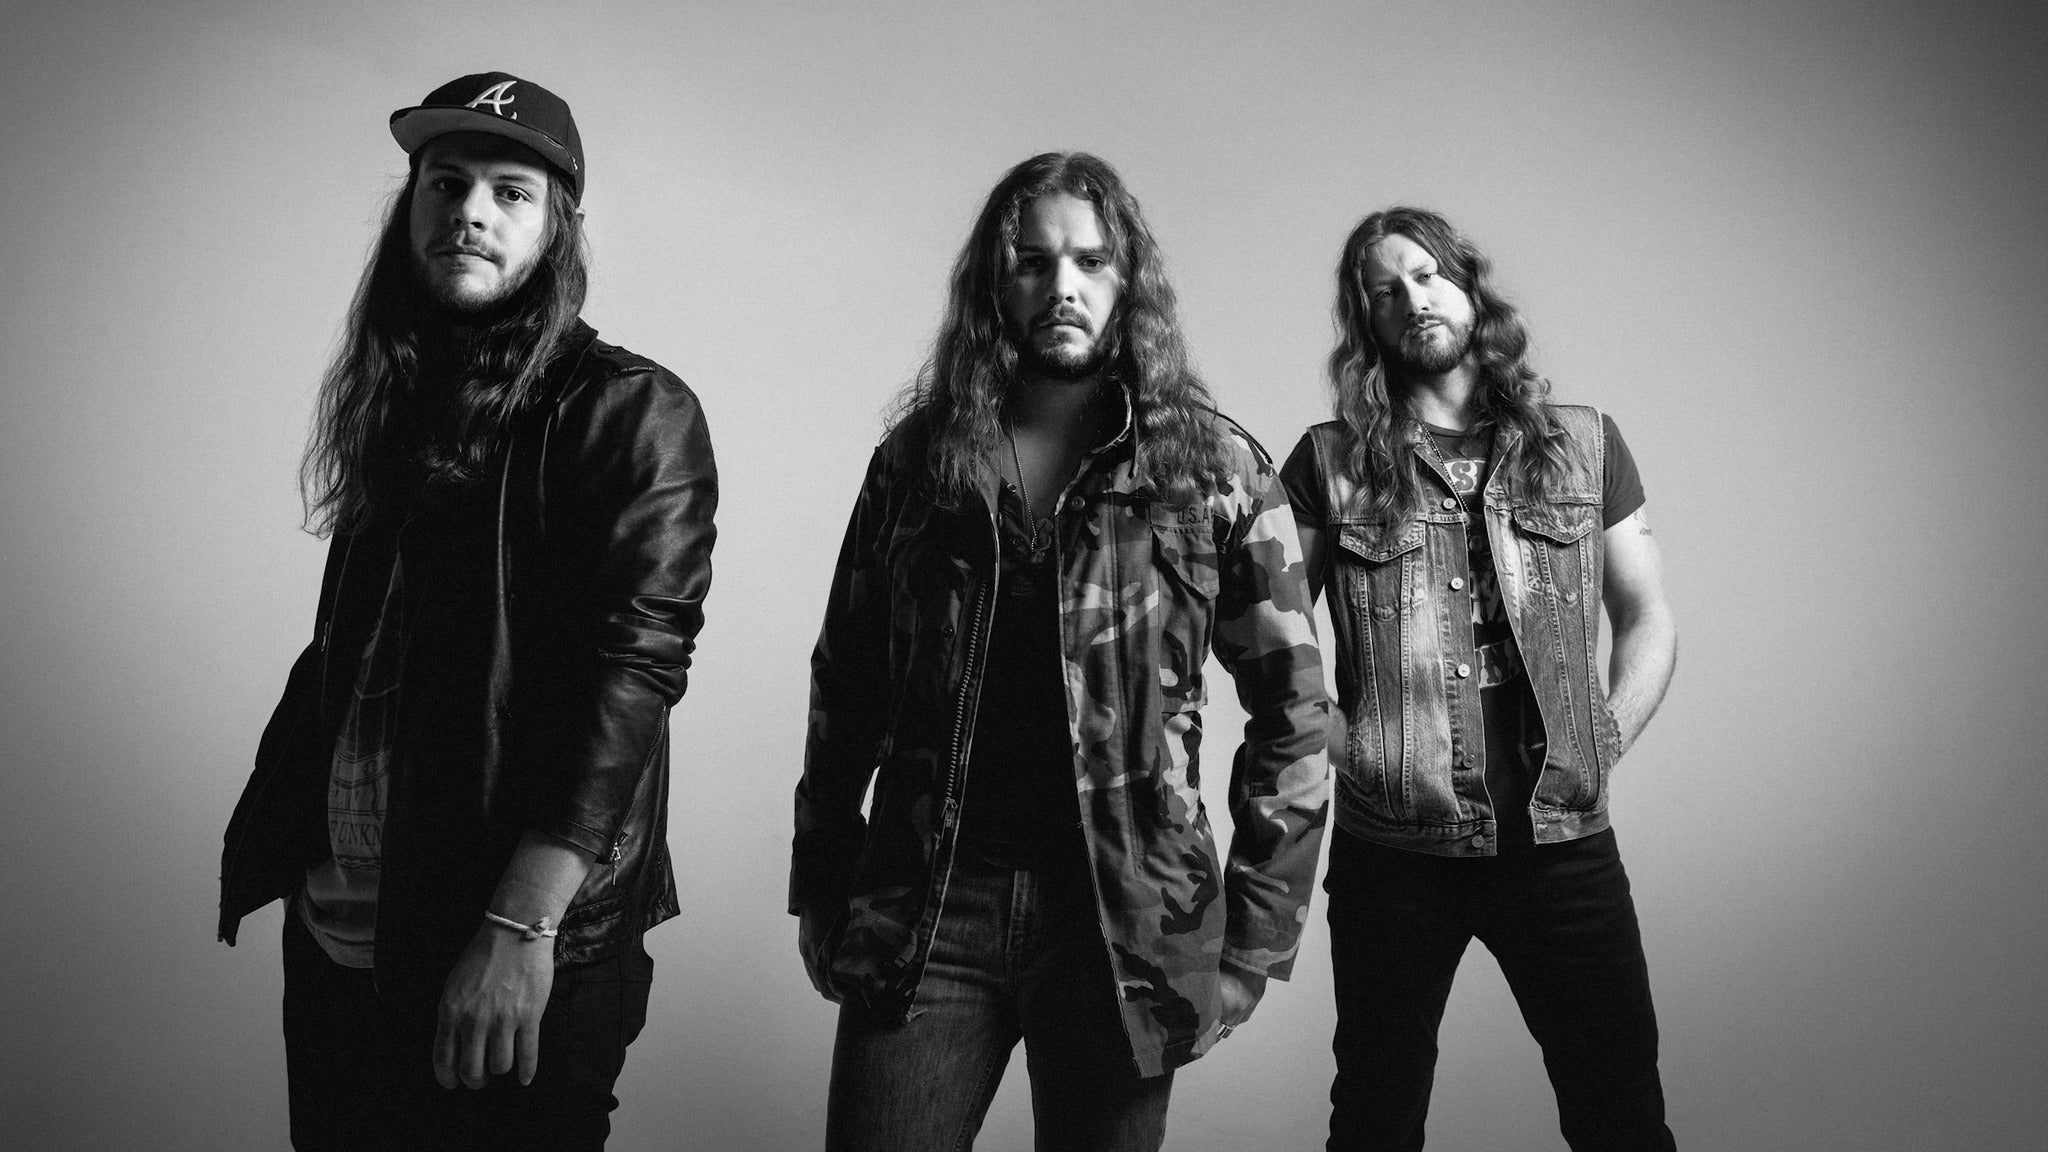 SiriusXM Outlaw Country & Ones to Watch Present Whiskey Myers in New York promo photo for Citi Cardmember Preferred presale offer code